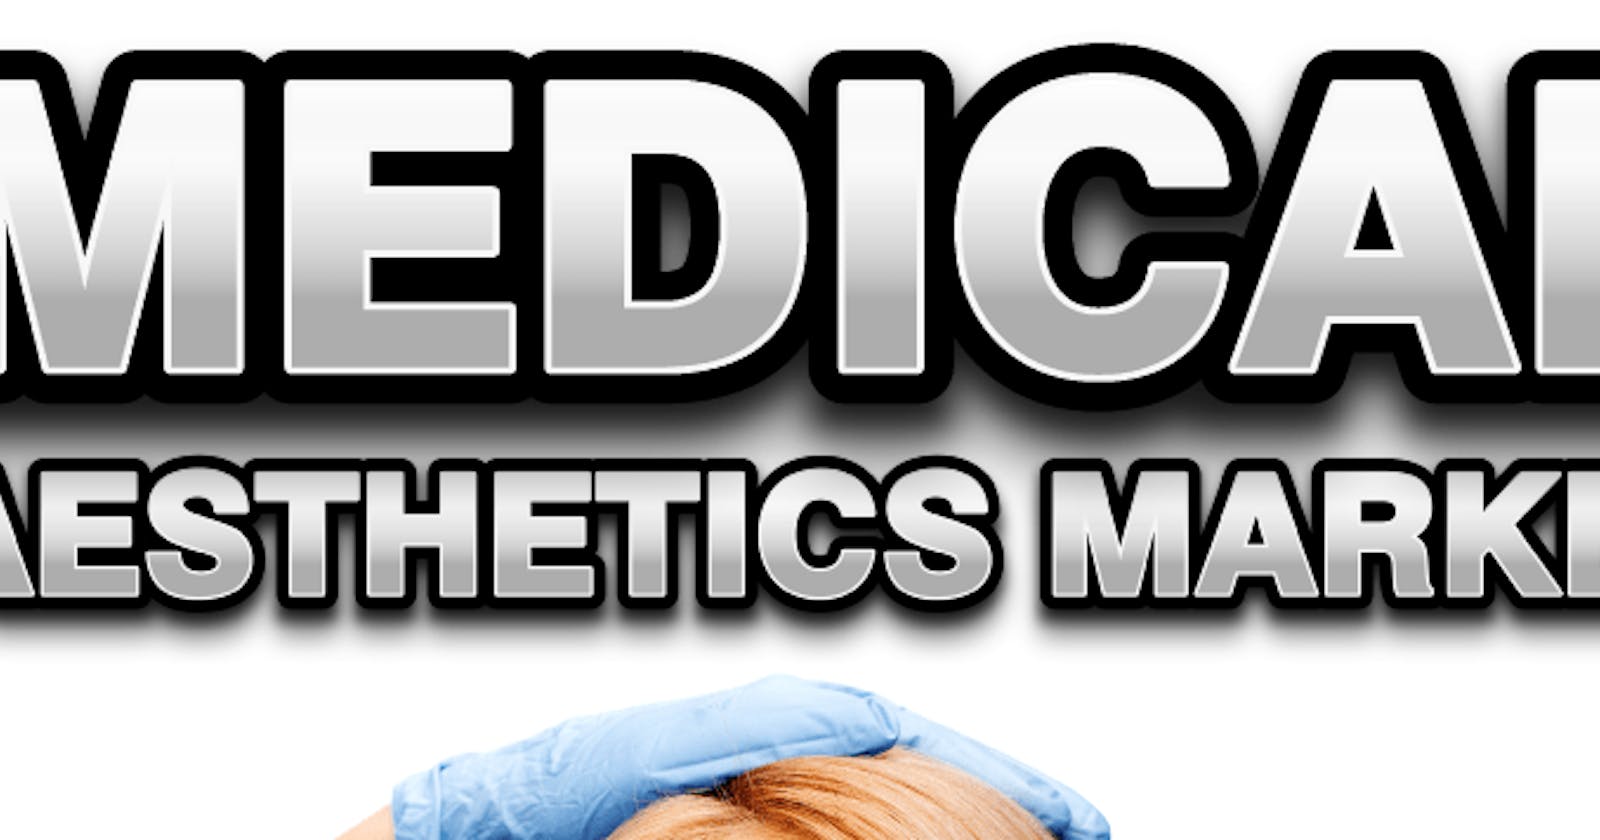 Medical Aesthetics Market Statistics: Size, Share, Trends, and Forecast